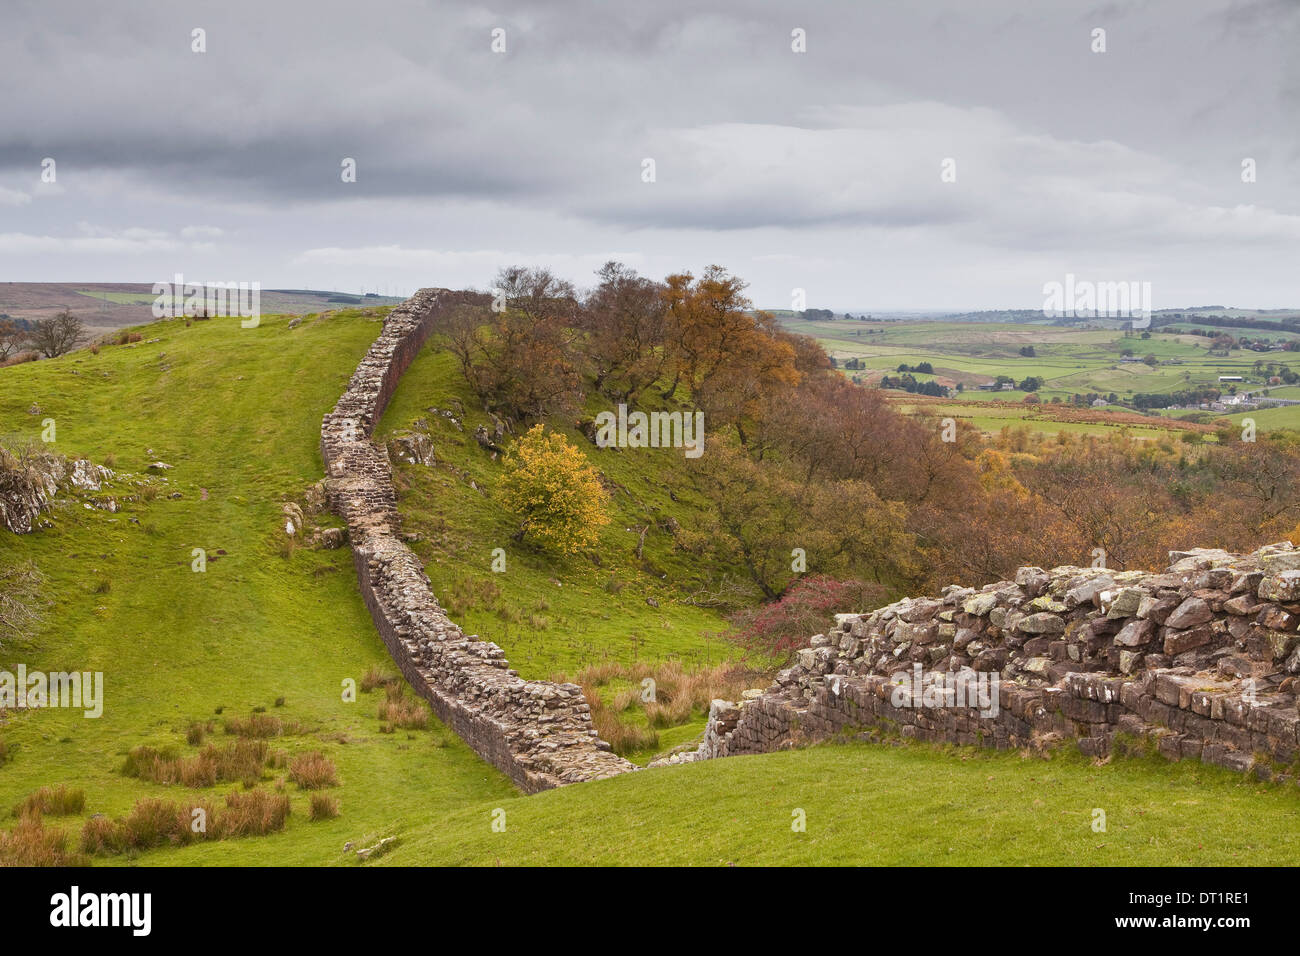 Mur d'Hadrien, l'UNESCO World Heritage Site, Northumberland, Angleterre, Royaume-Uni, Europe Banque D'Images